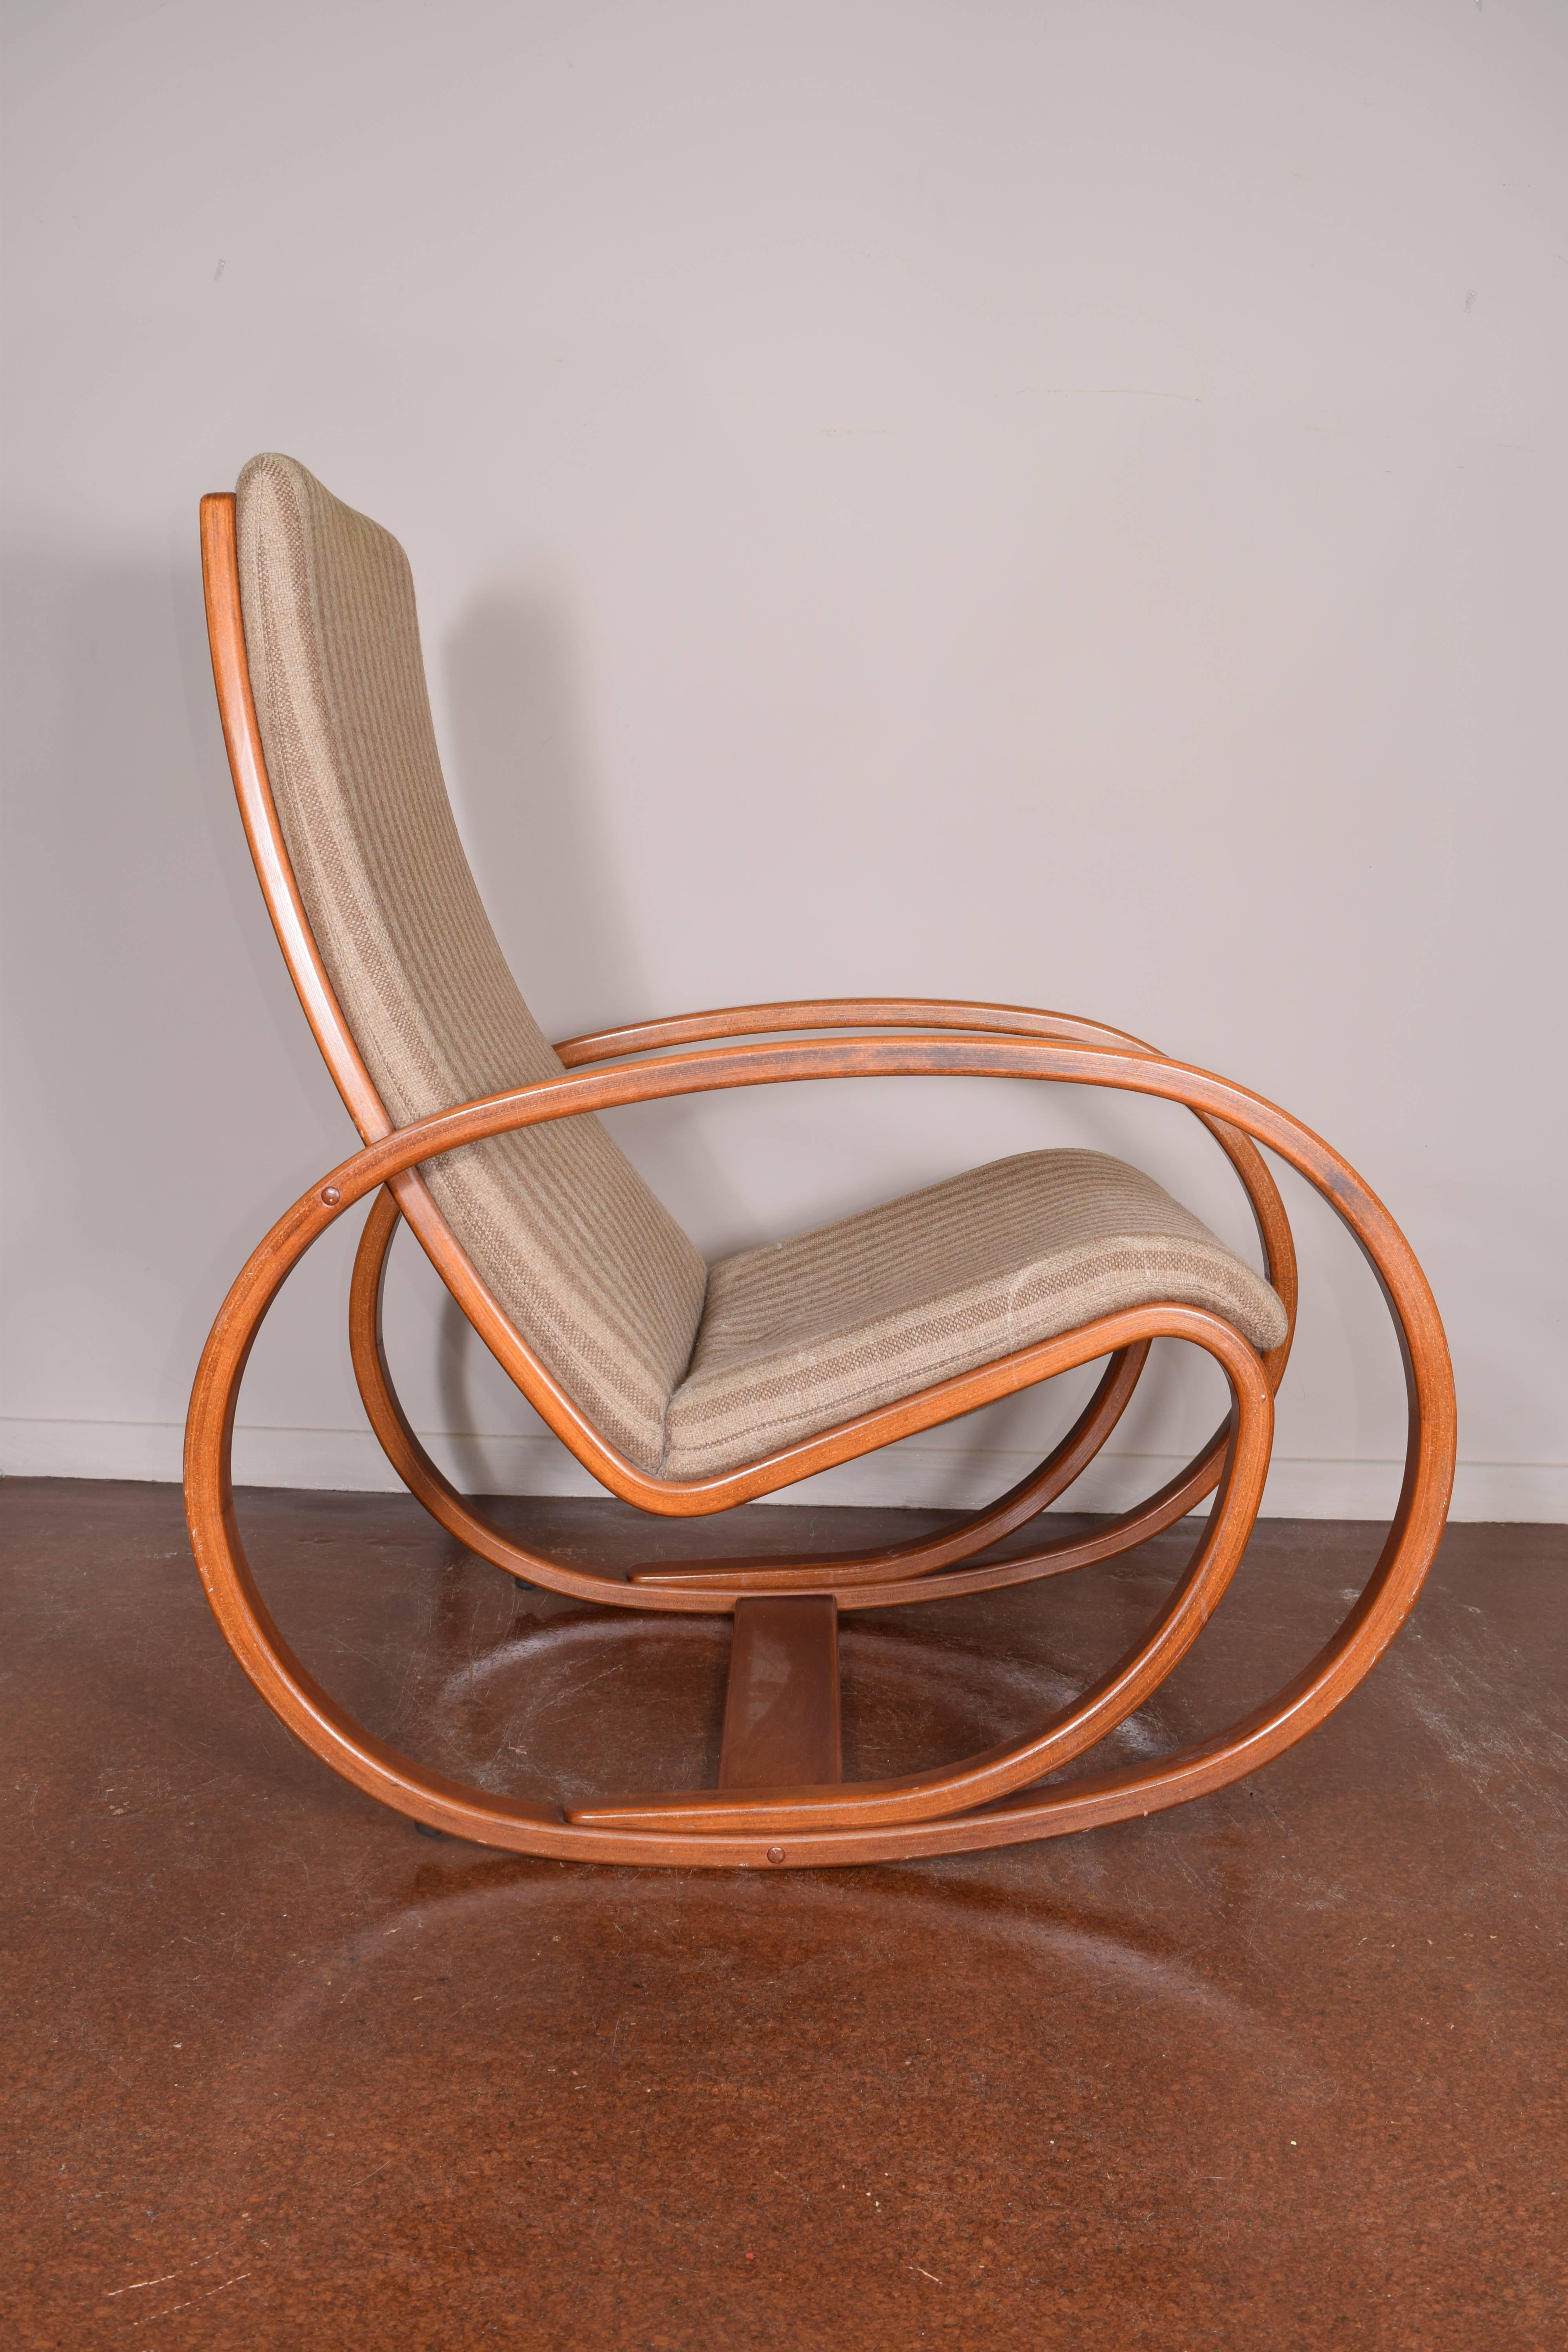 Vintage EJ25 rocker with beech bentwood frame by Jorgen Gammelgaard. 
Free delivery to NYC.